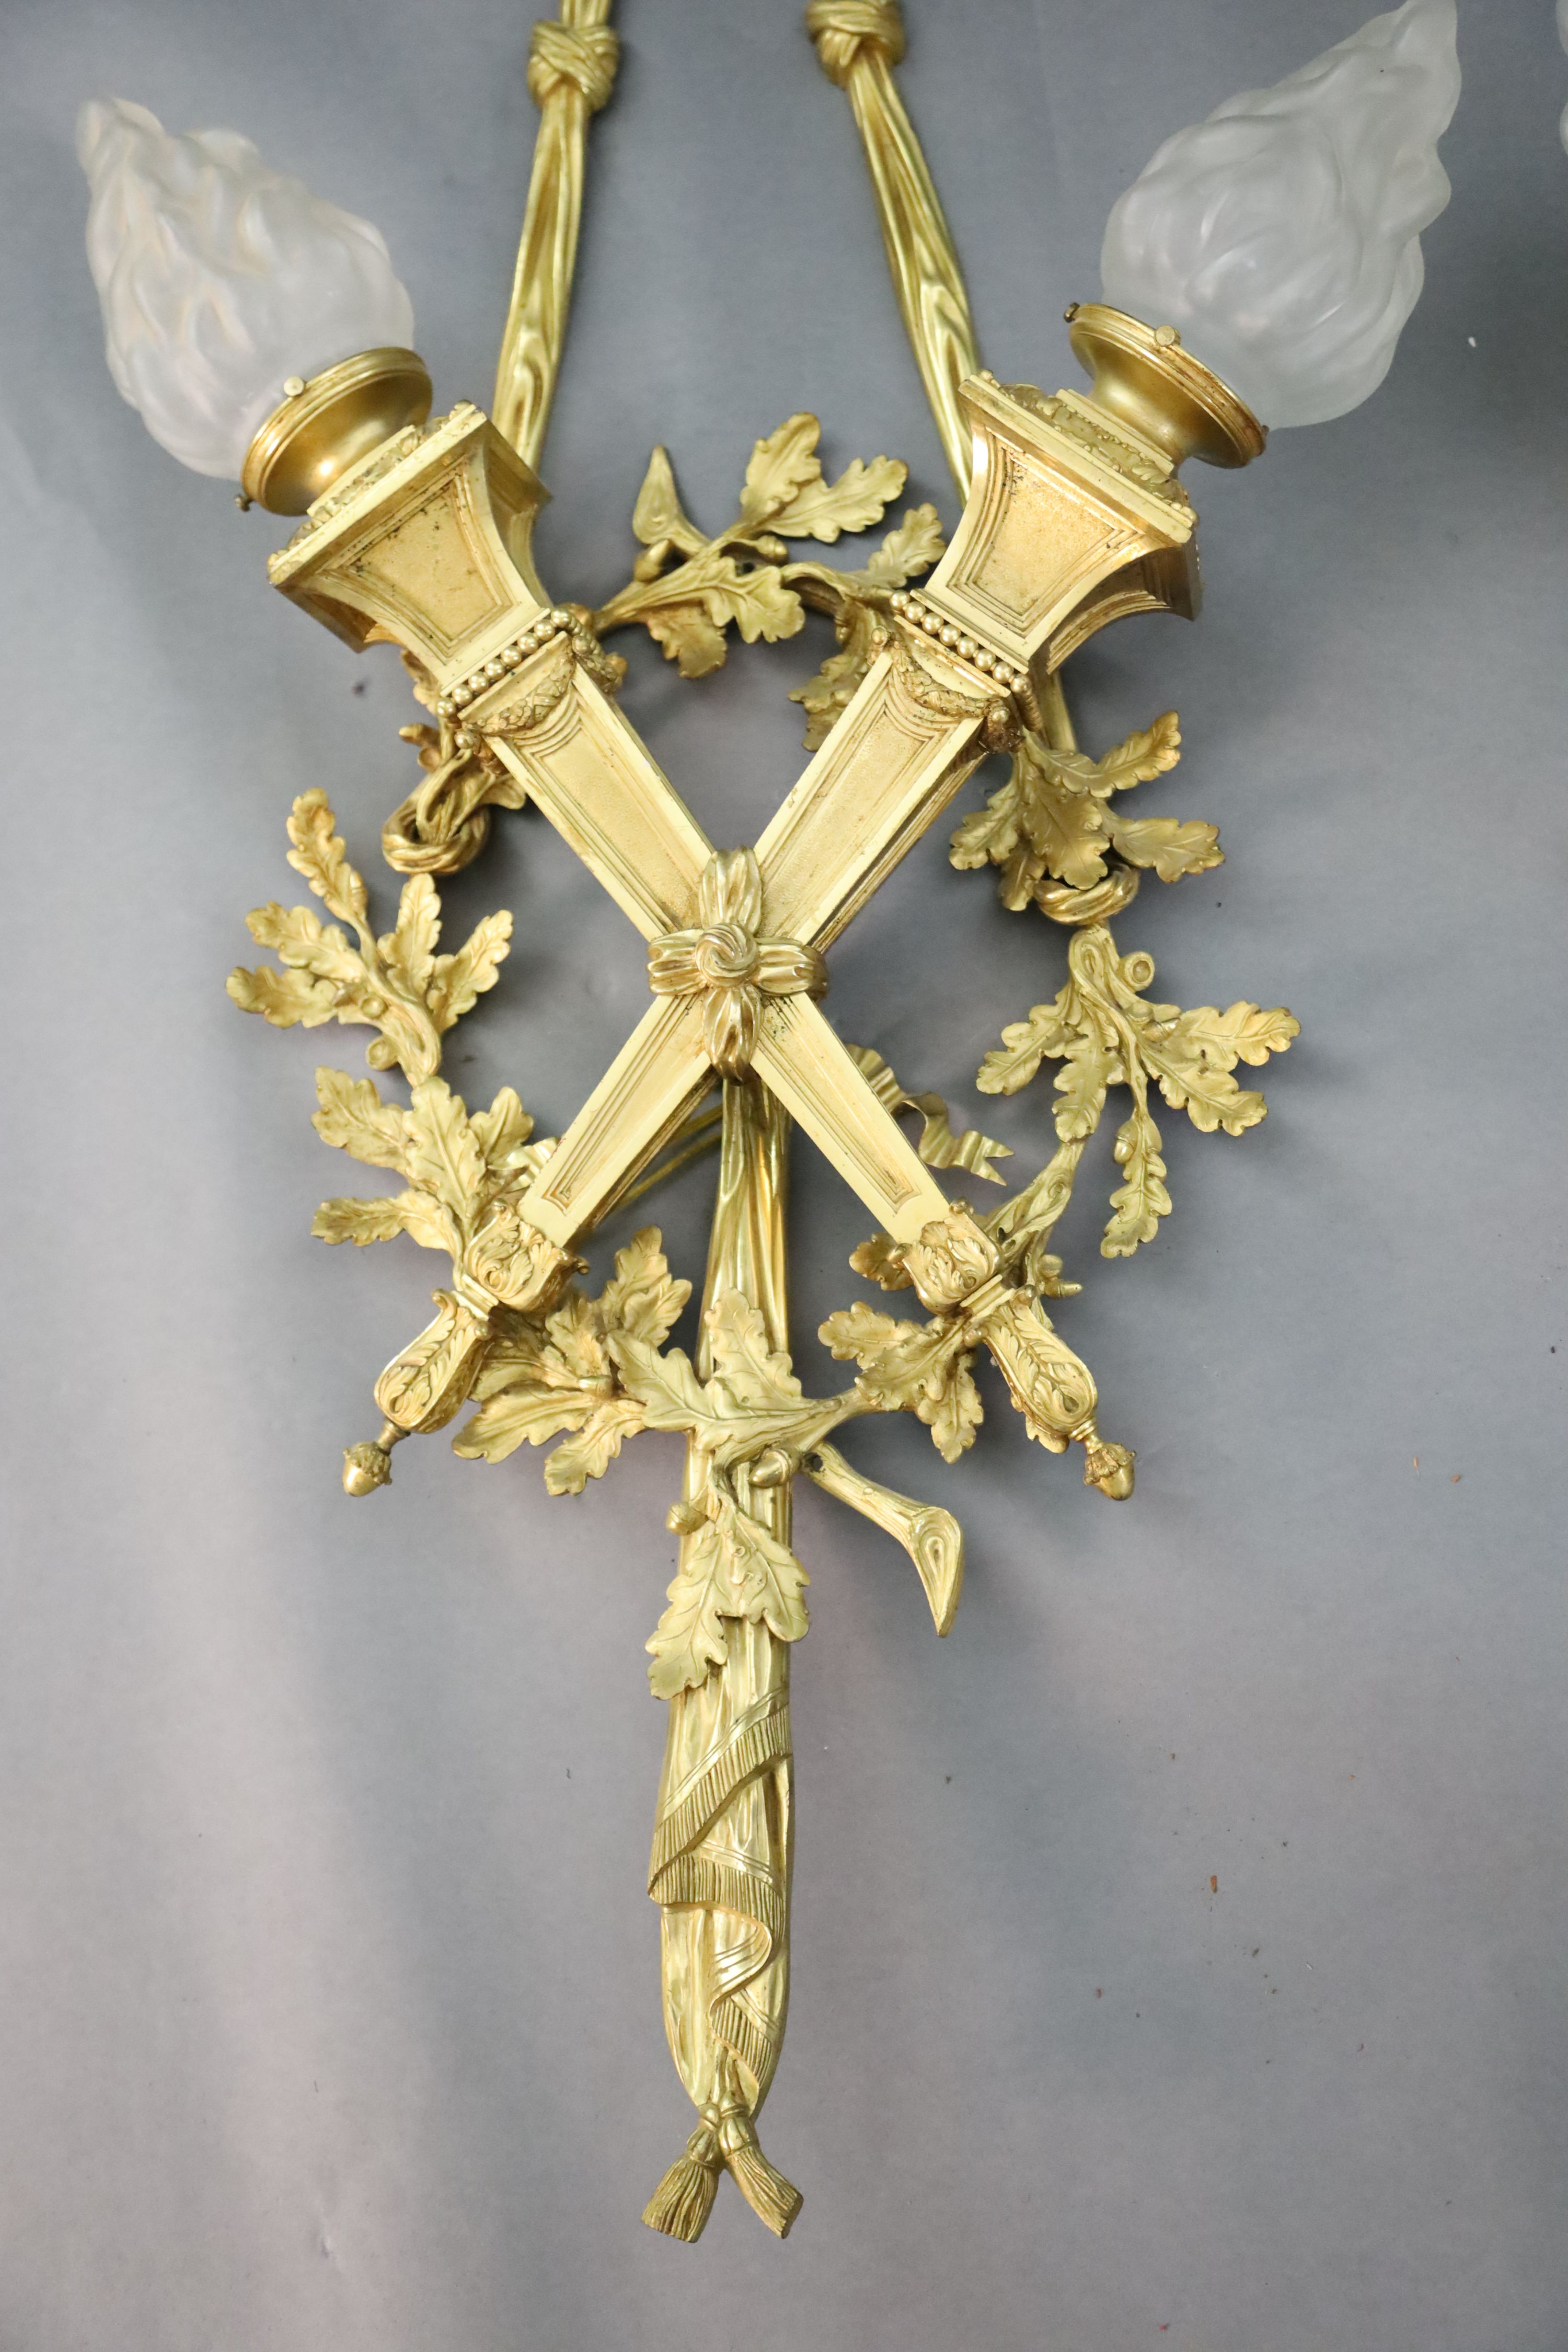 A pair of early 20th century Louis XVI style ormolu wall lights, width 1ft 10in. height 4ft 2in.